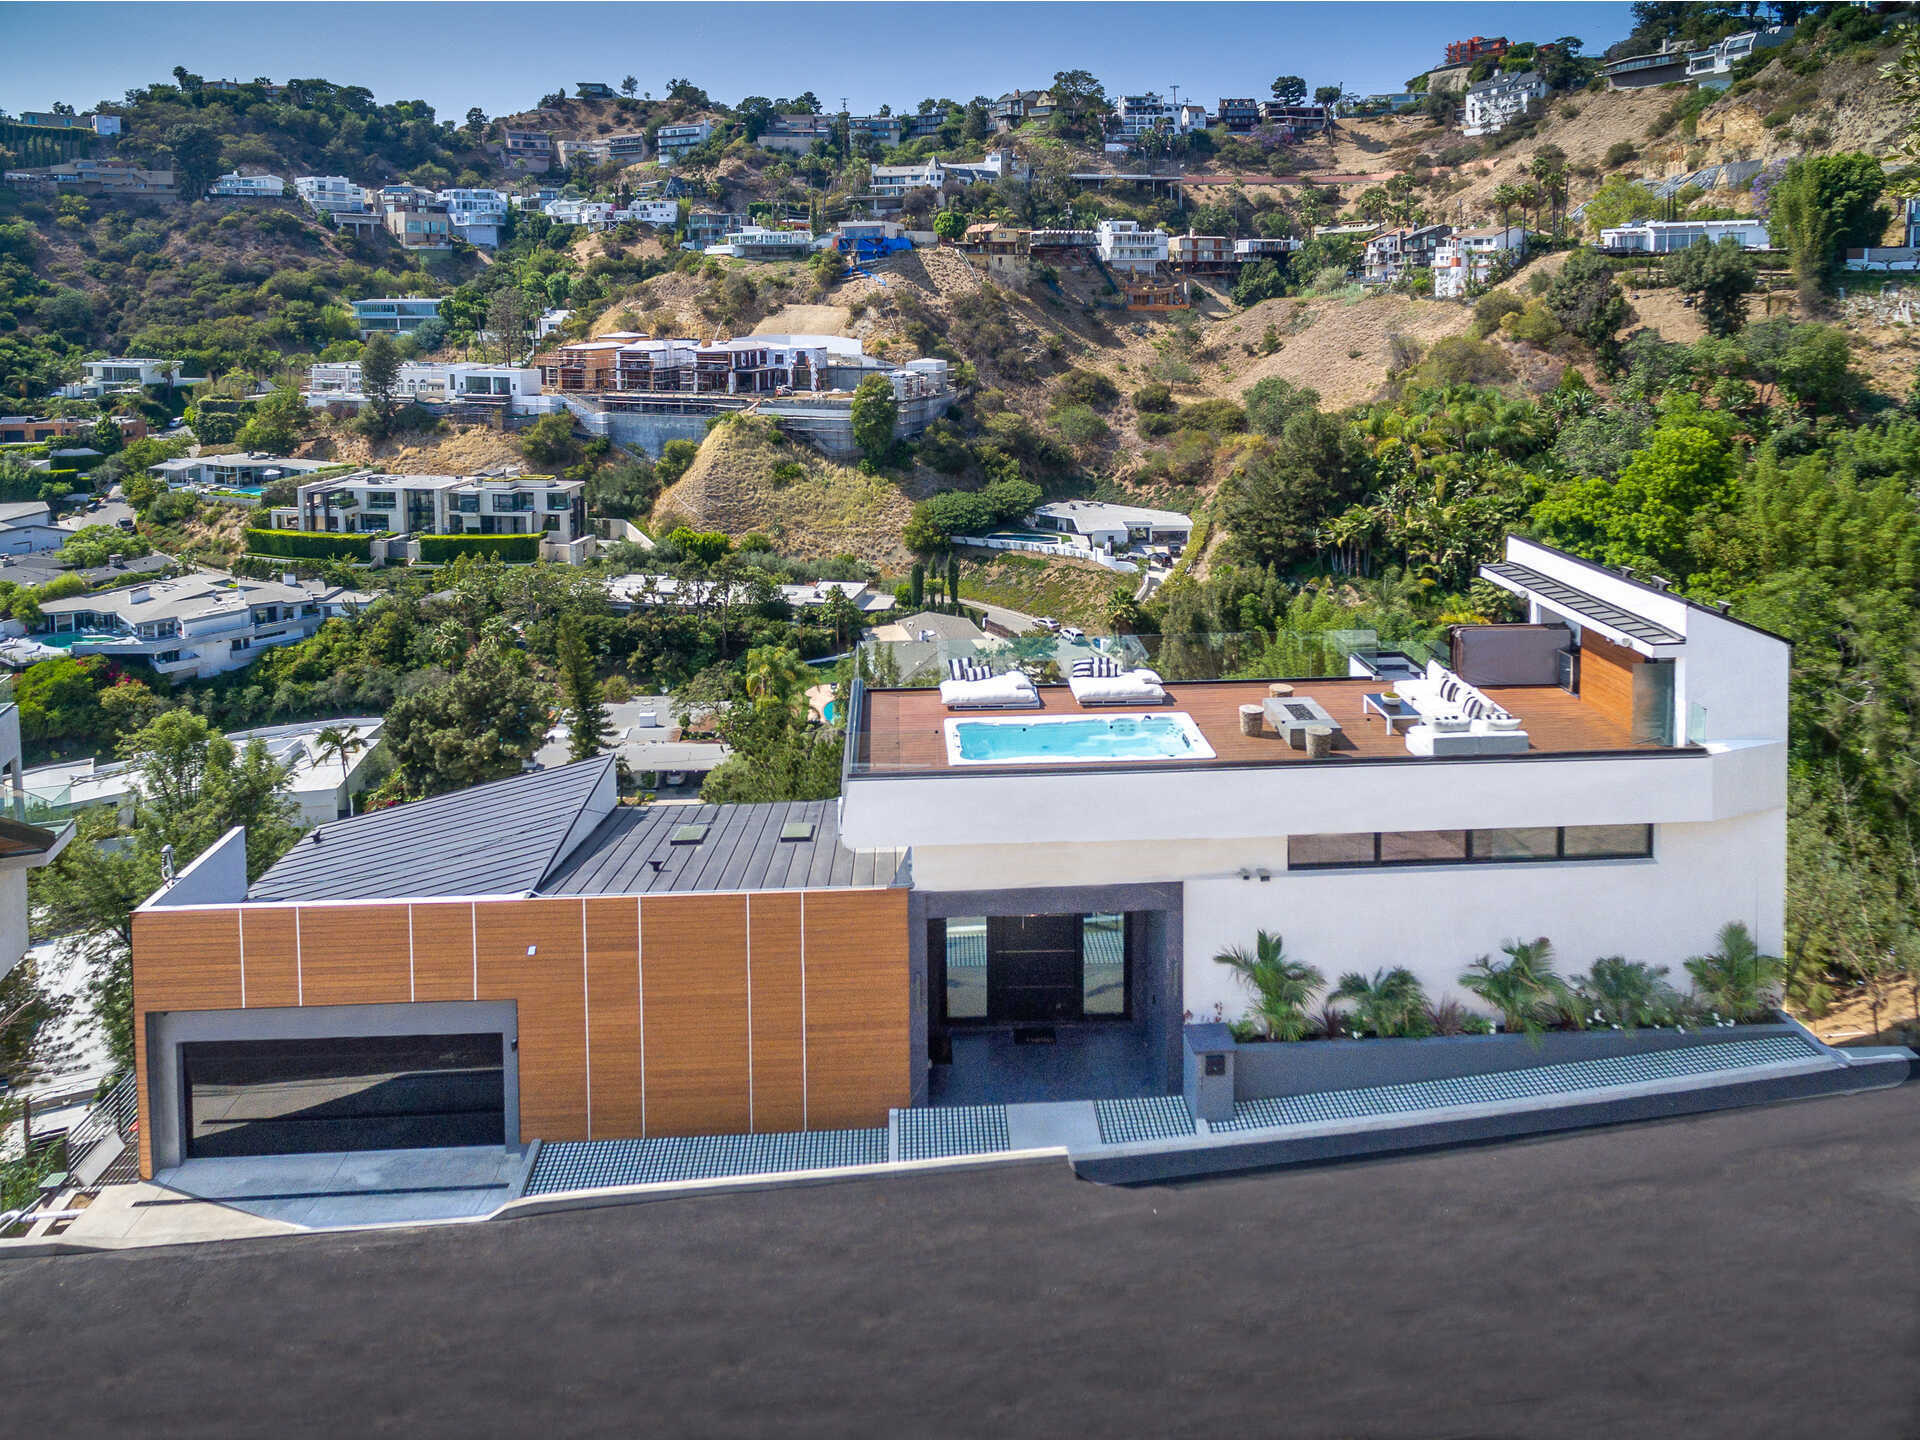 This-6350000-Newly-Constructed-Los-Angeles-Home-is-the-Ultimate-Hollywood-Hills-Haven-7